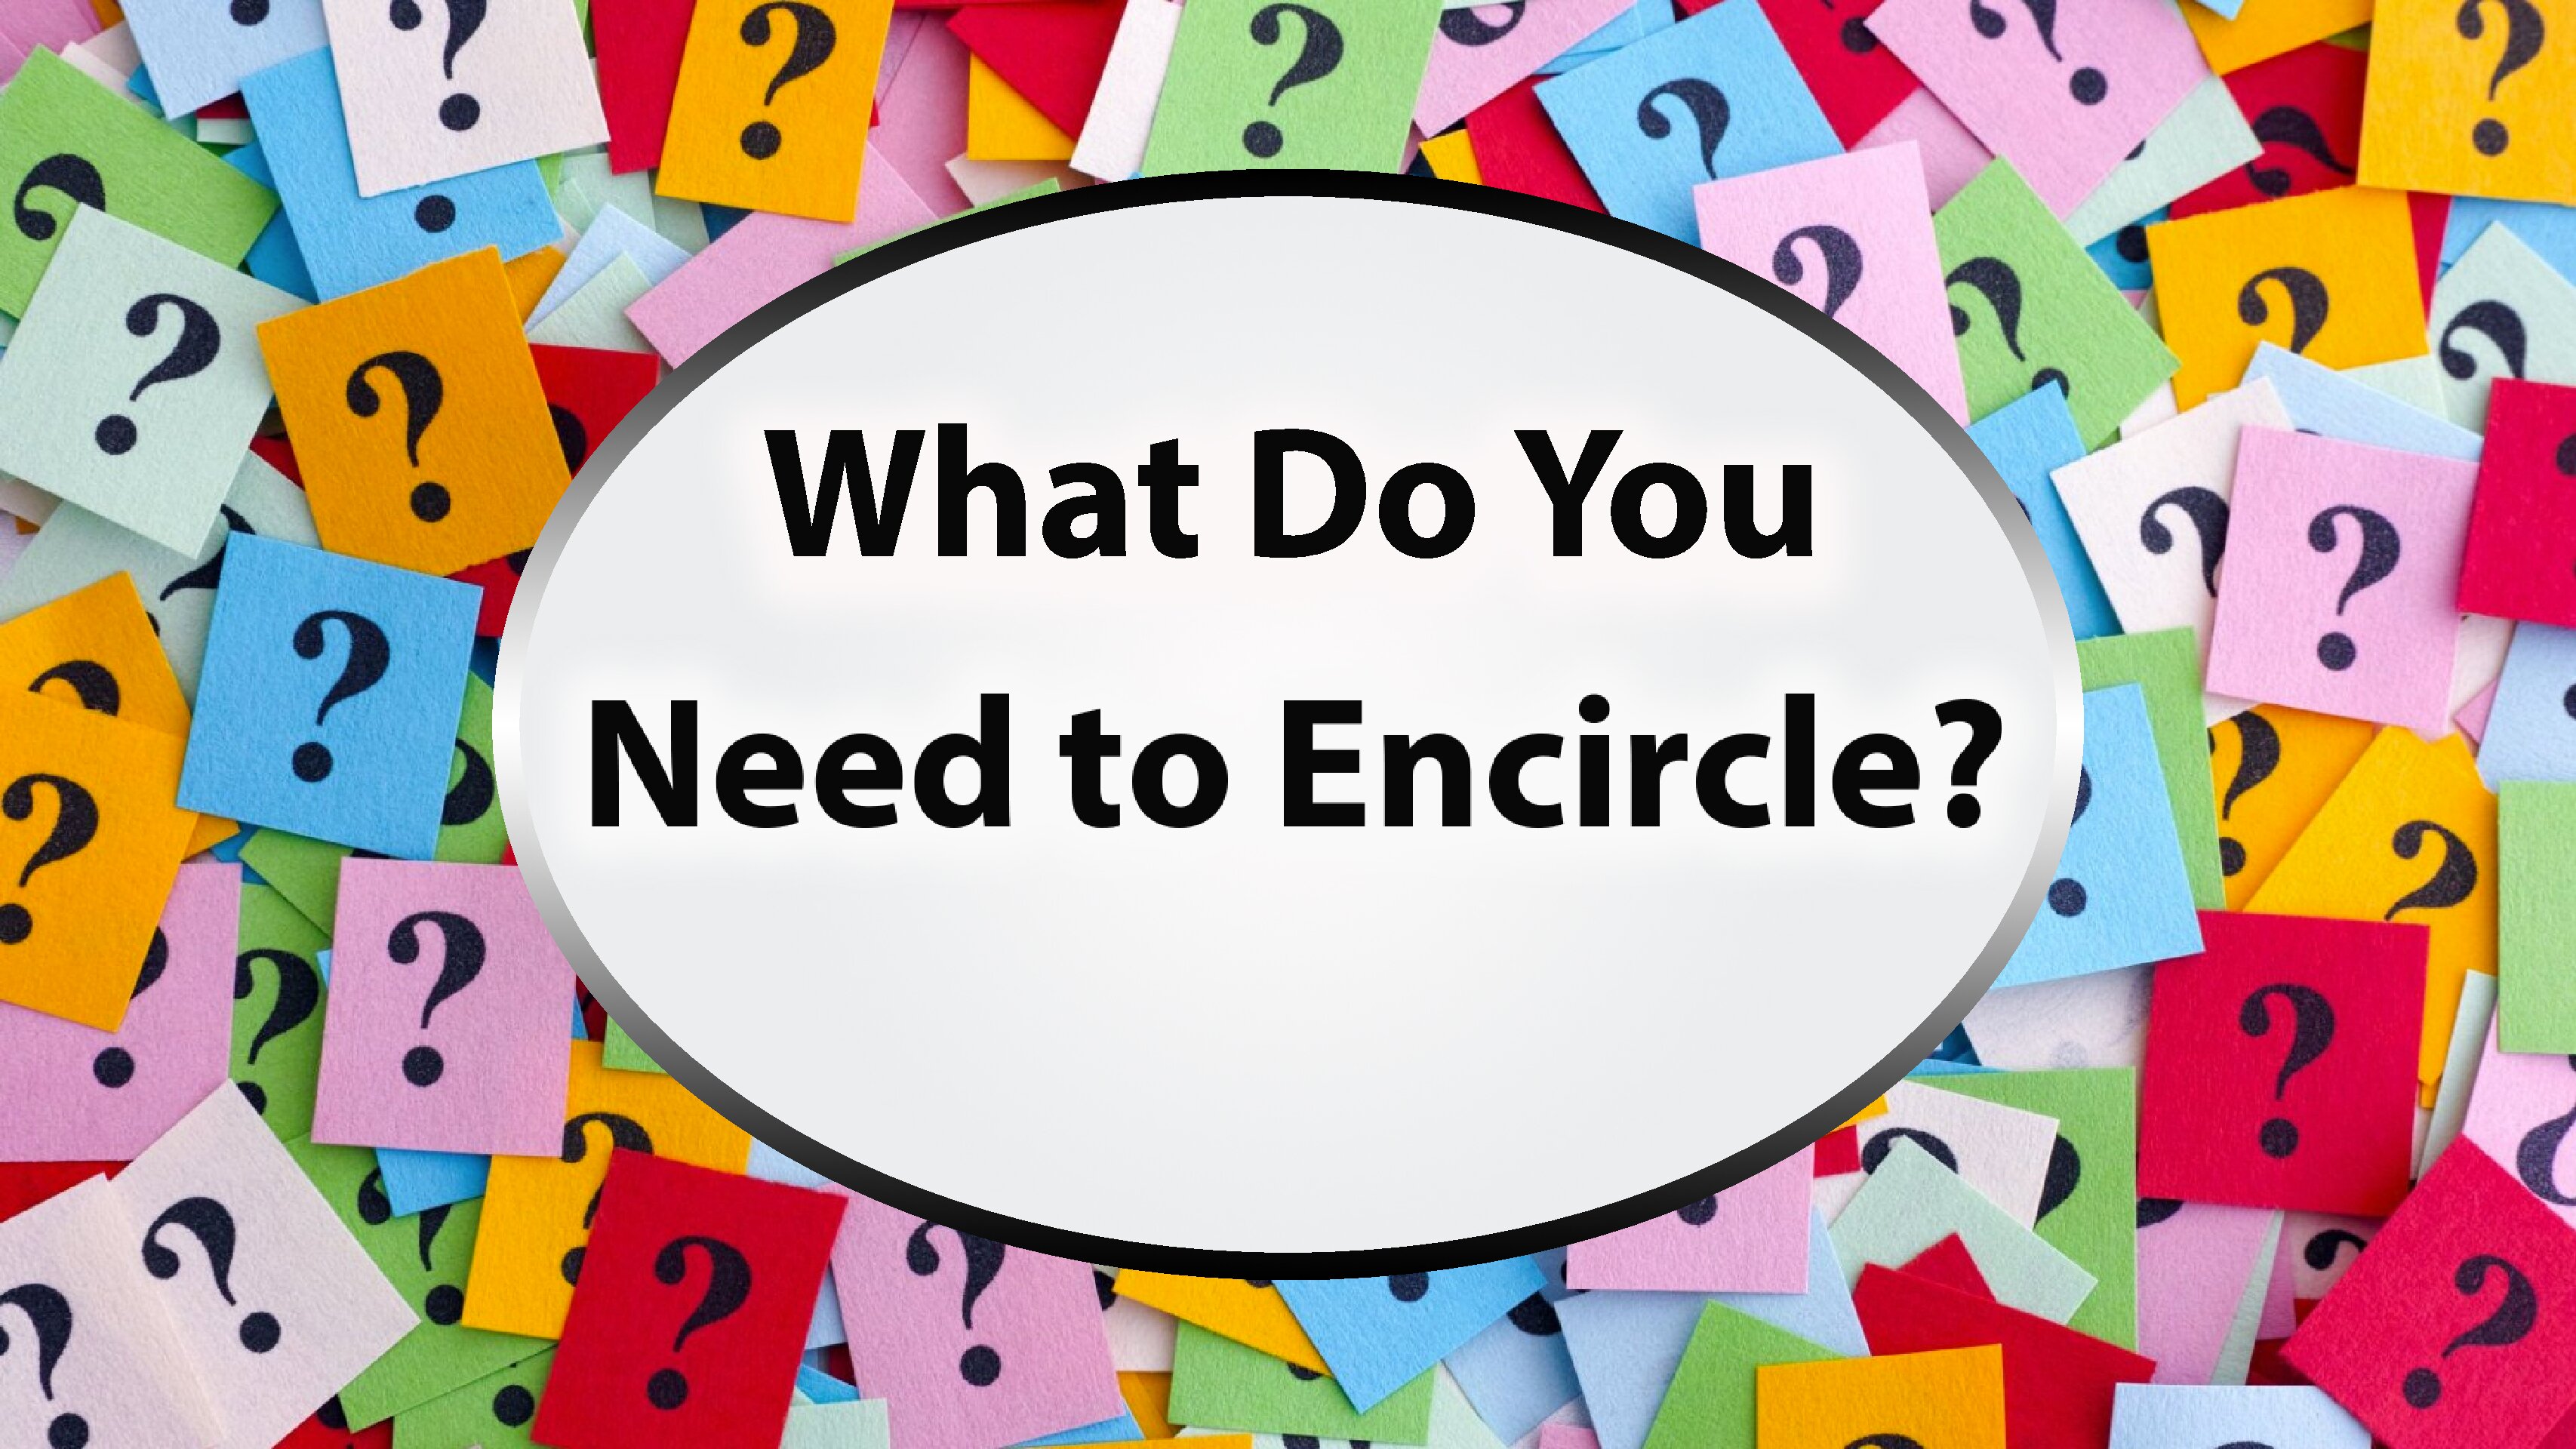 What Do You Need to Encircle?